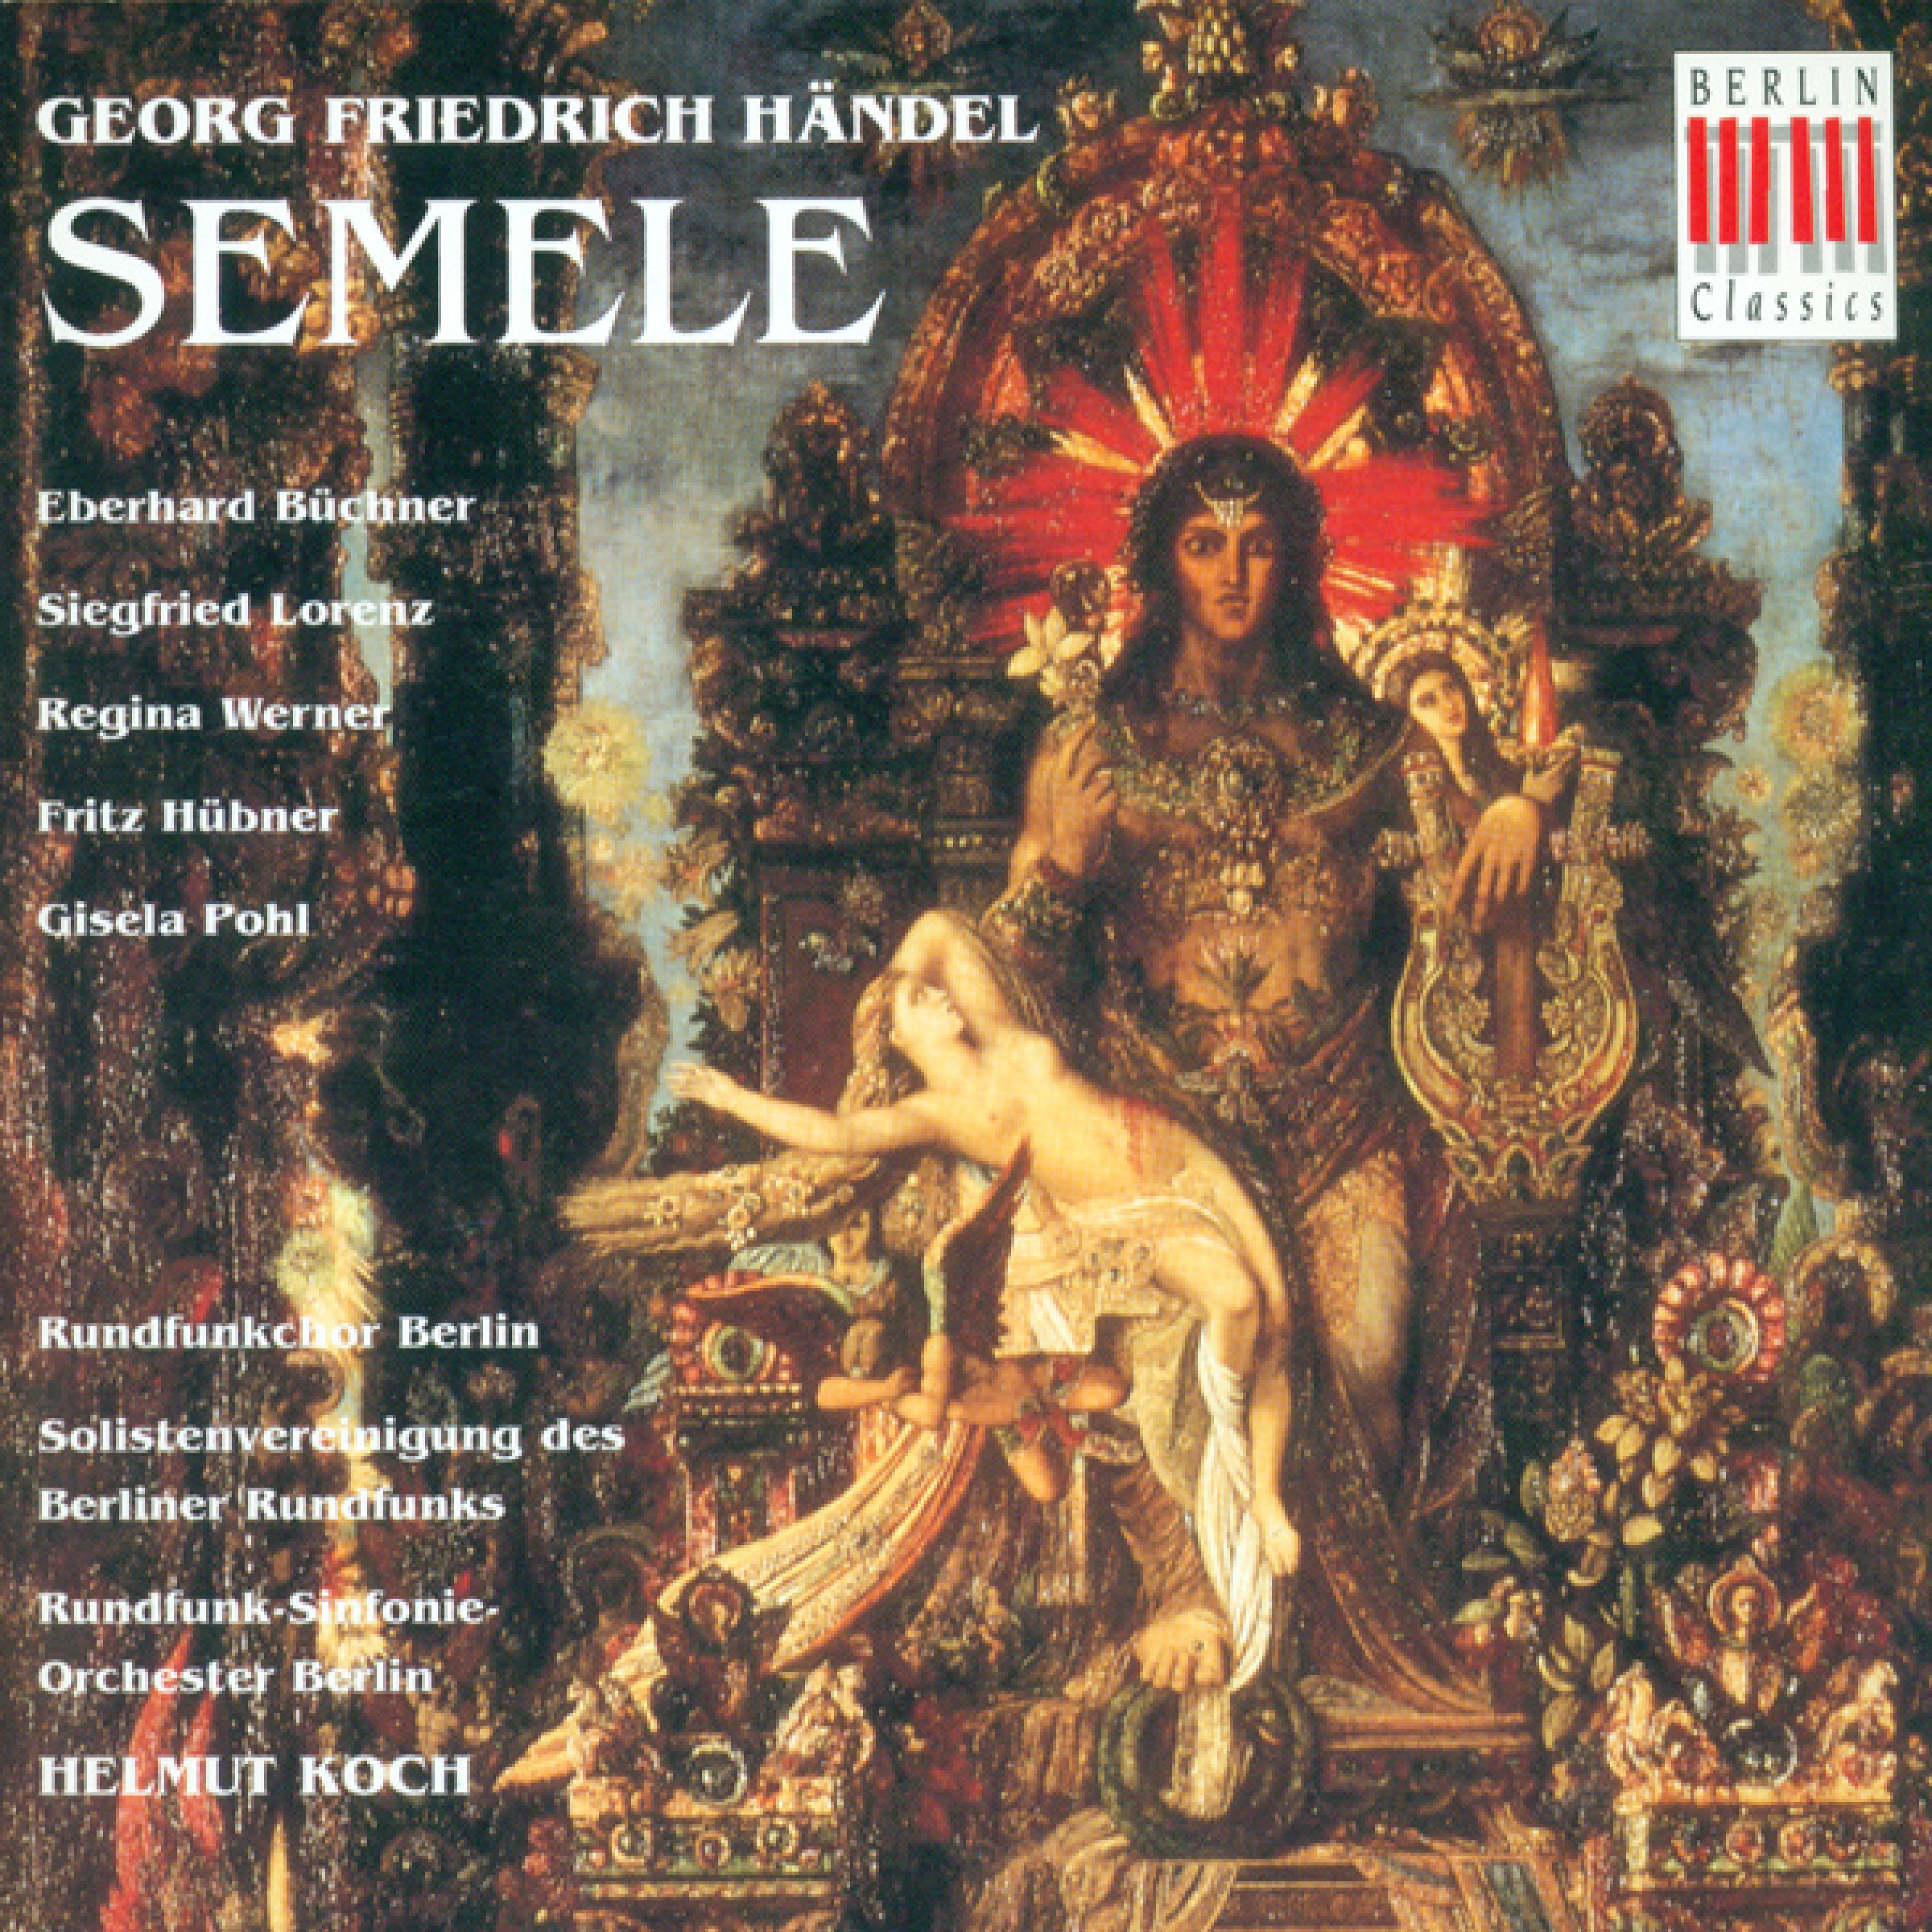 Semele, HWV 58: Act II - "Lay your doubts and fears aside"